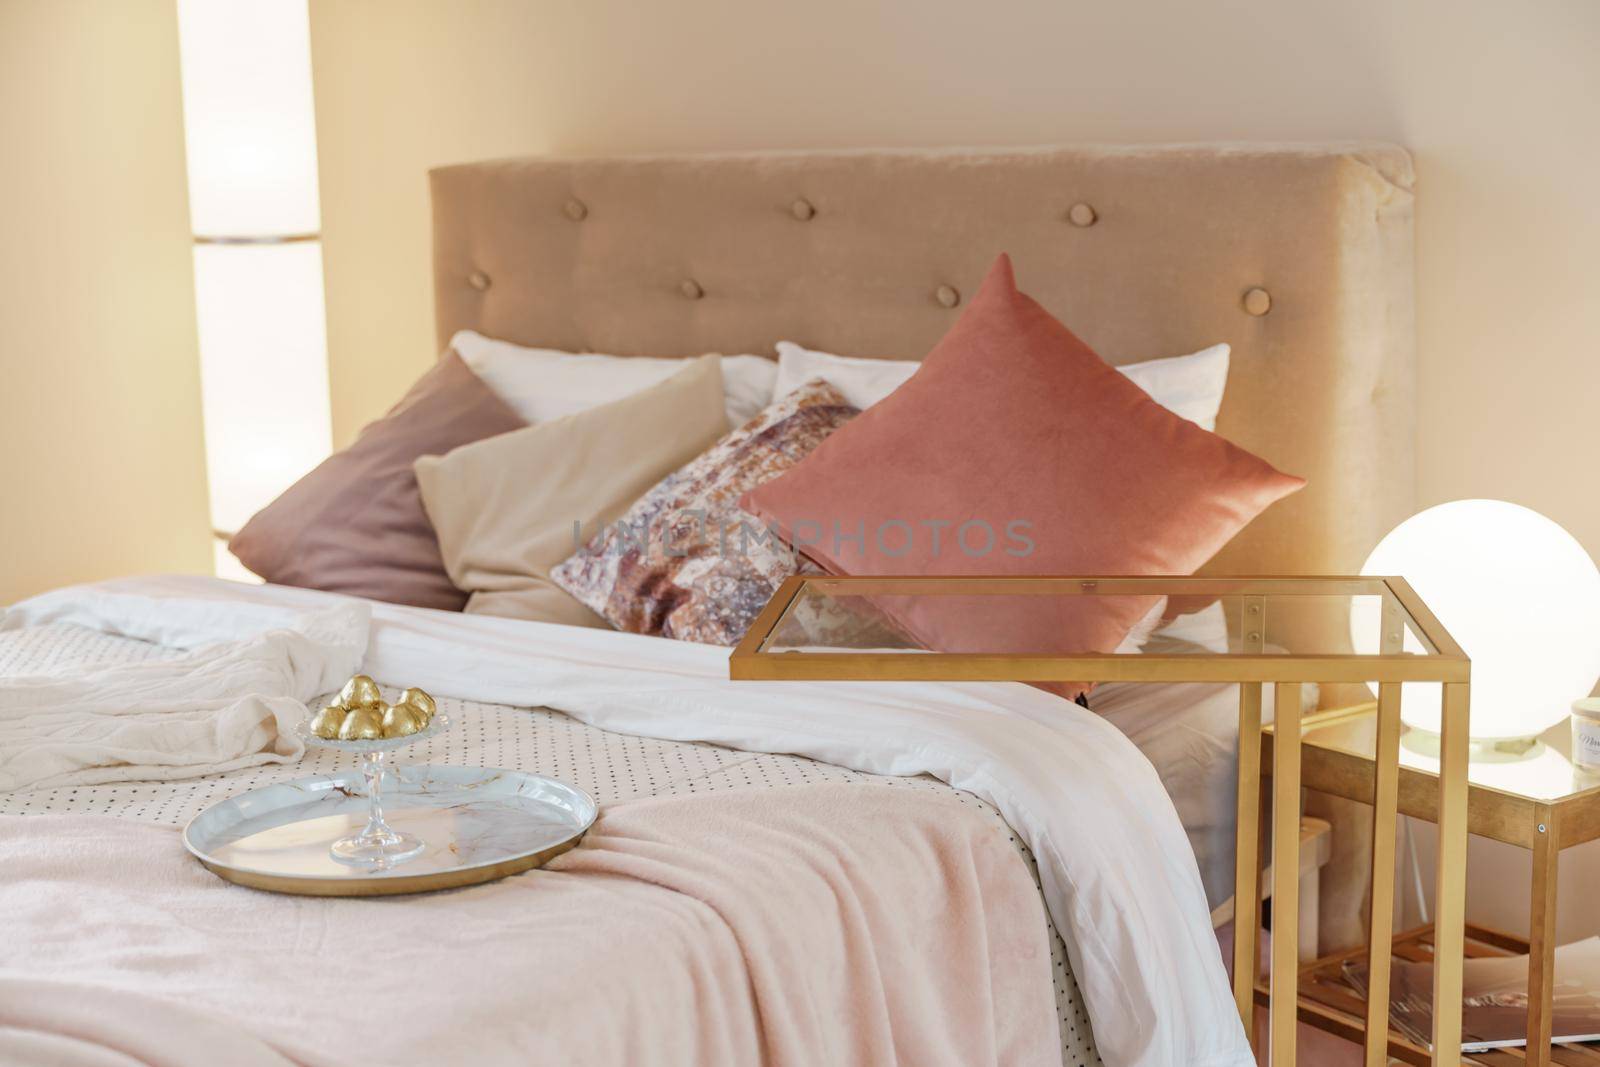 Bedroom interior in light colors with wooden furniture and pillows. Lamps on both sides